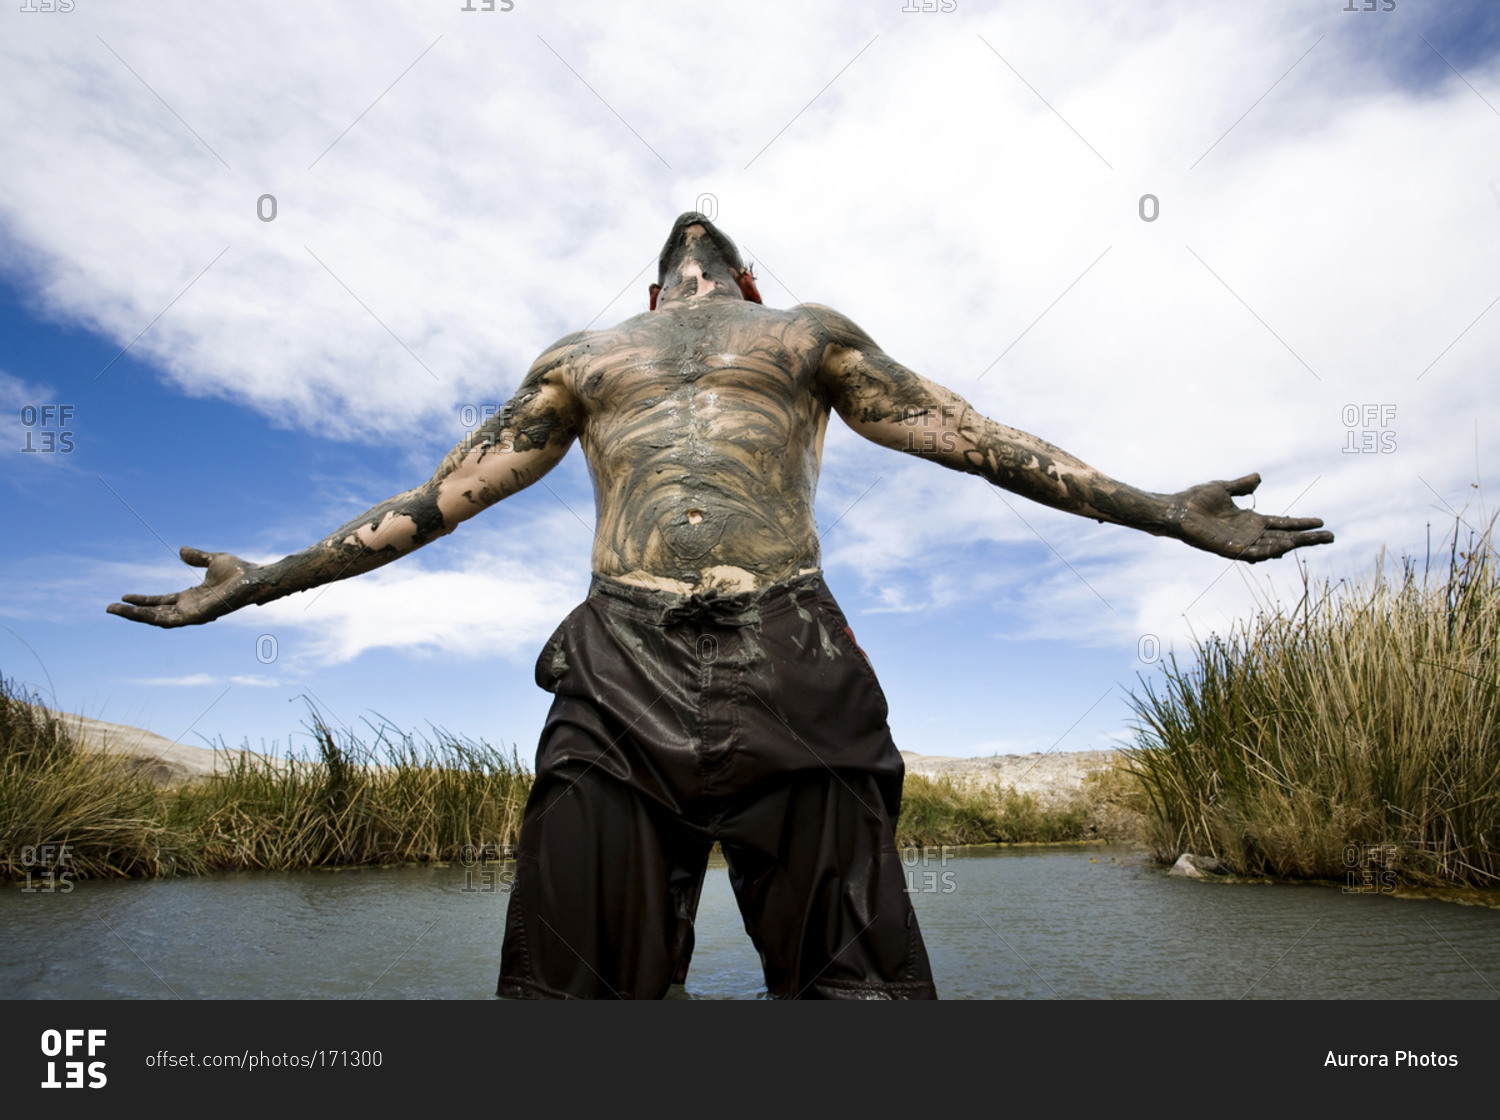 A Man Stands Shirtless And Covered In Mud In A Hot Springs With Arms Out To His Side Tecopa